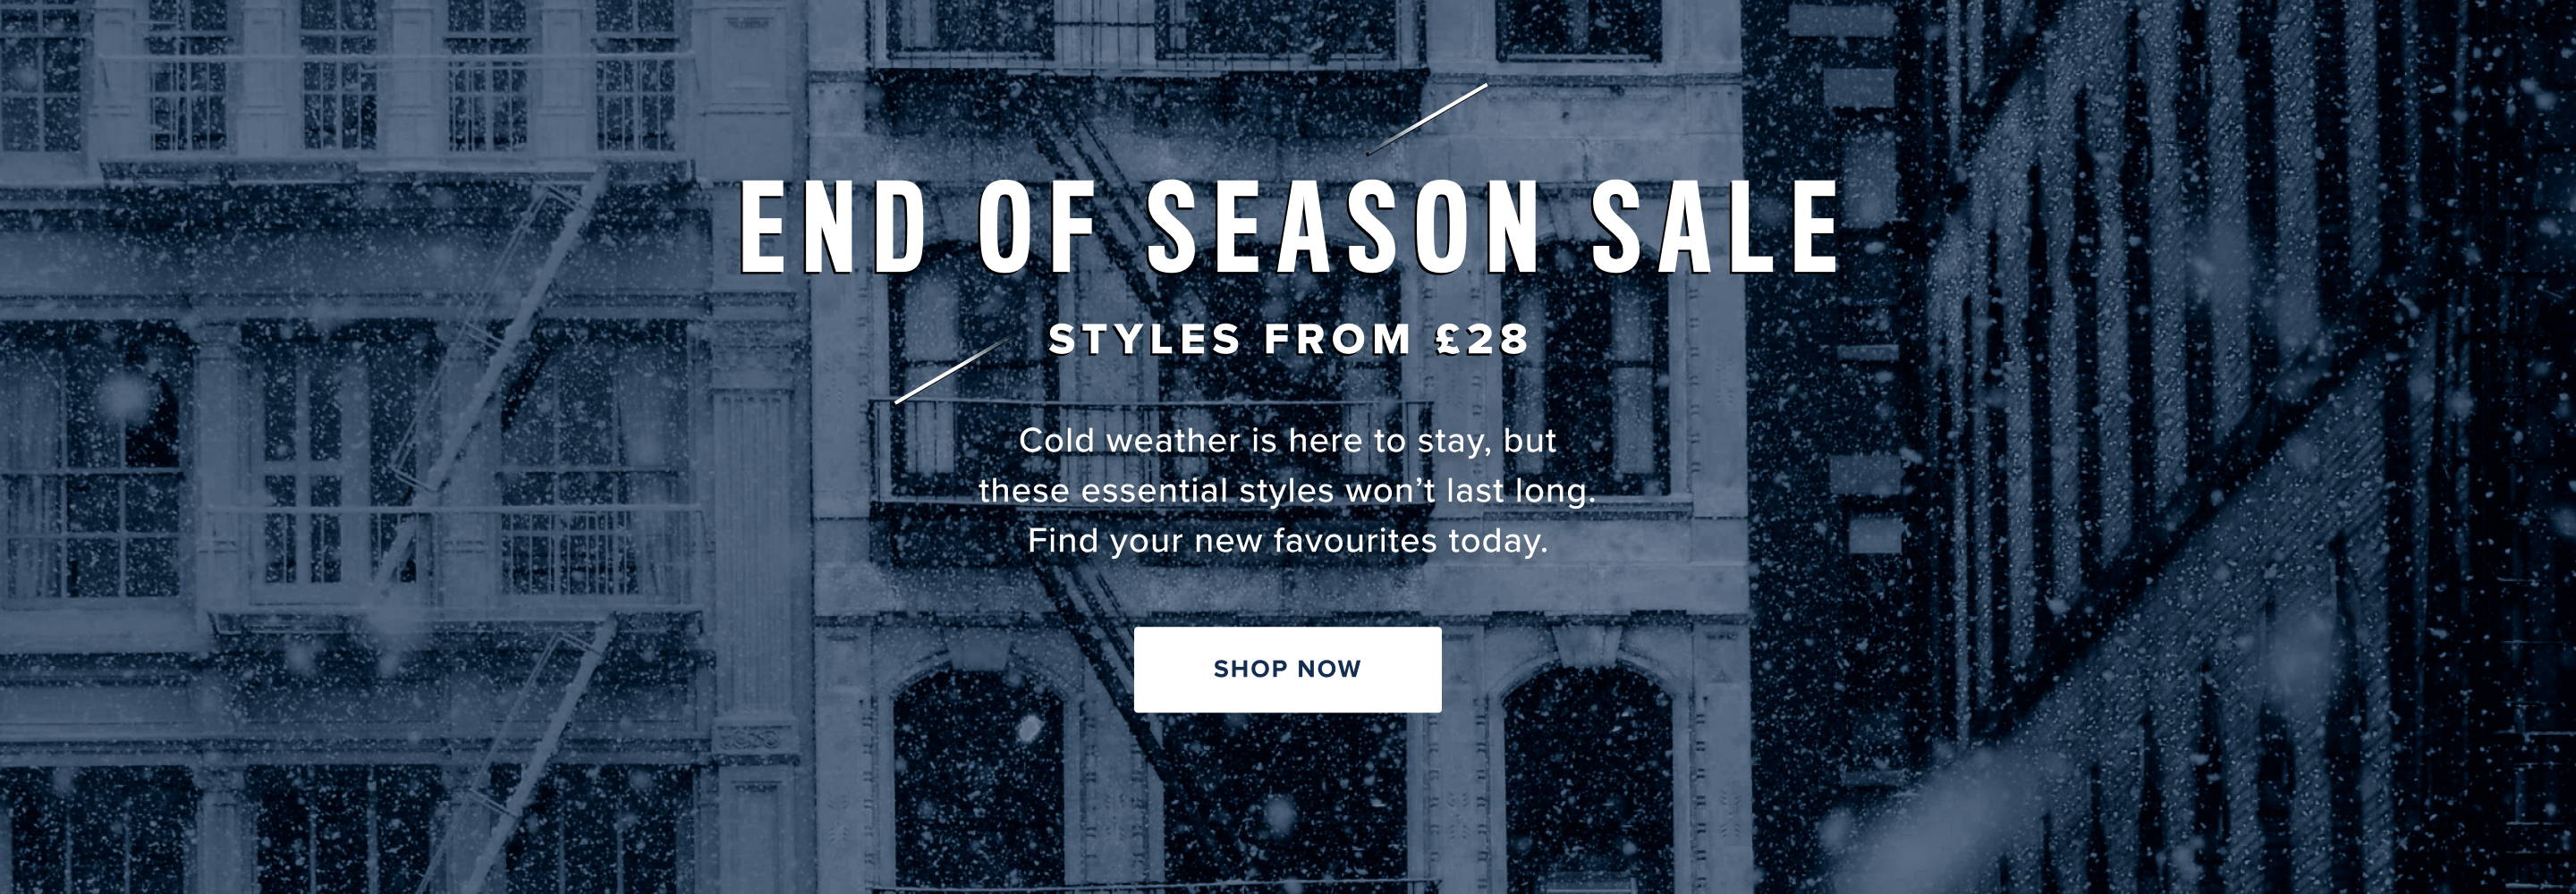 End of season sale. Styles from £28.